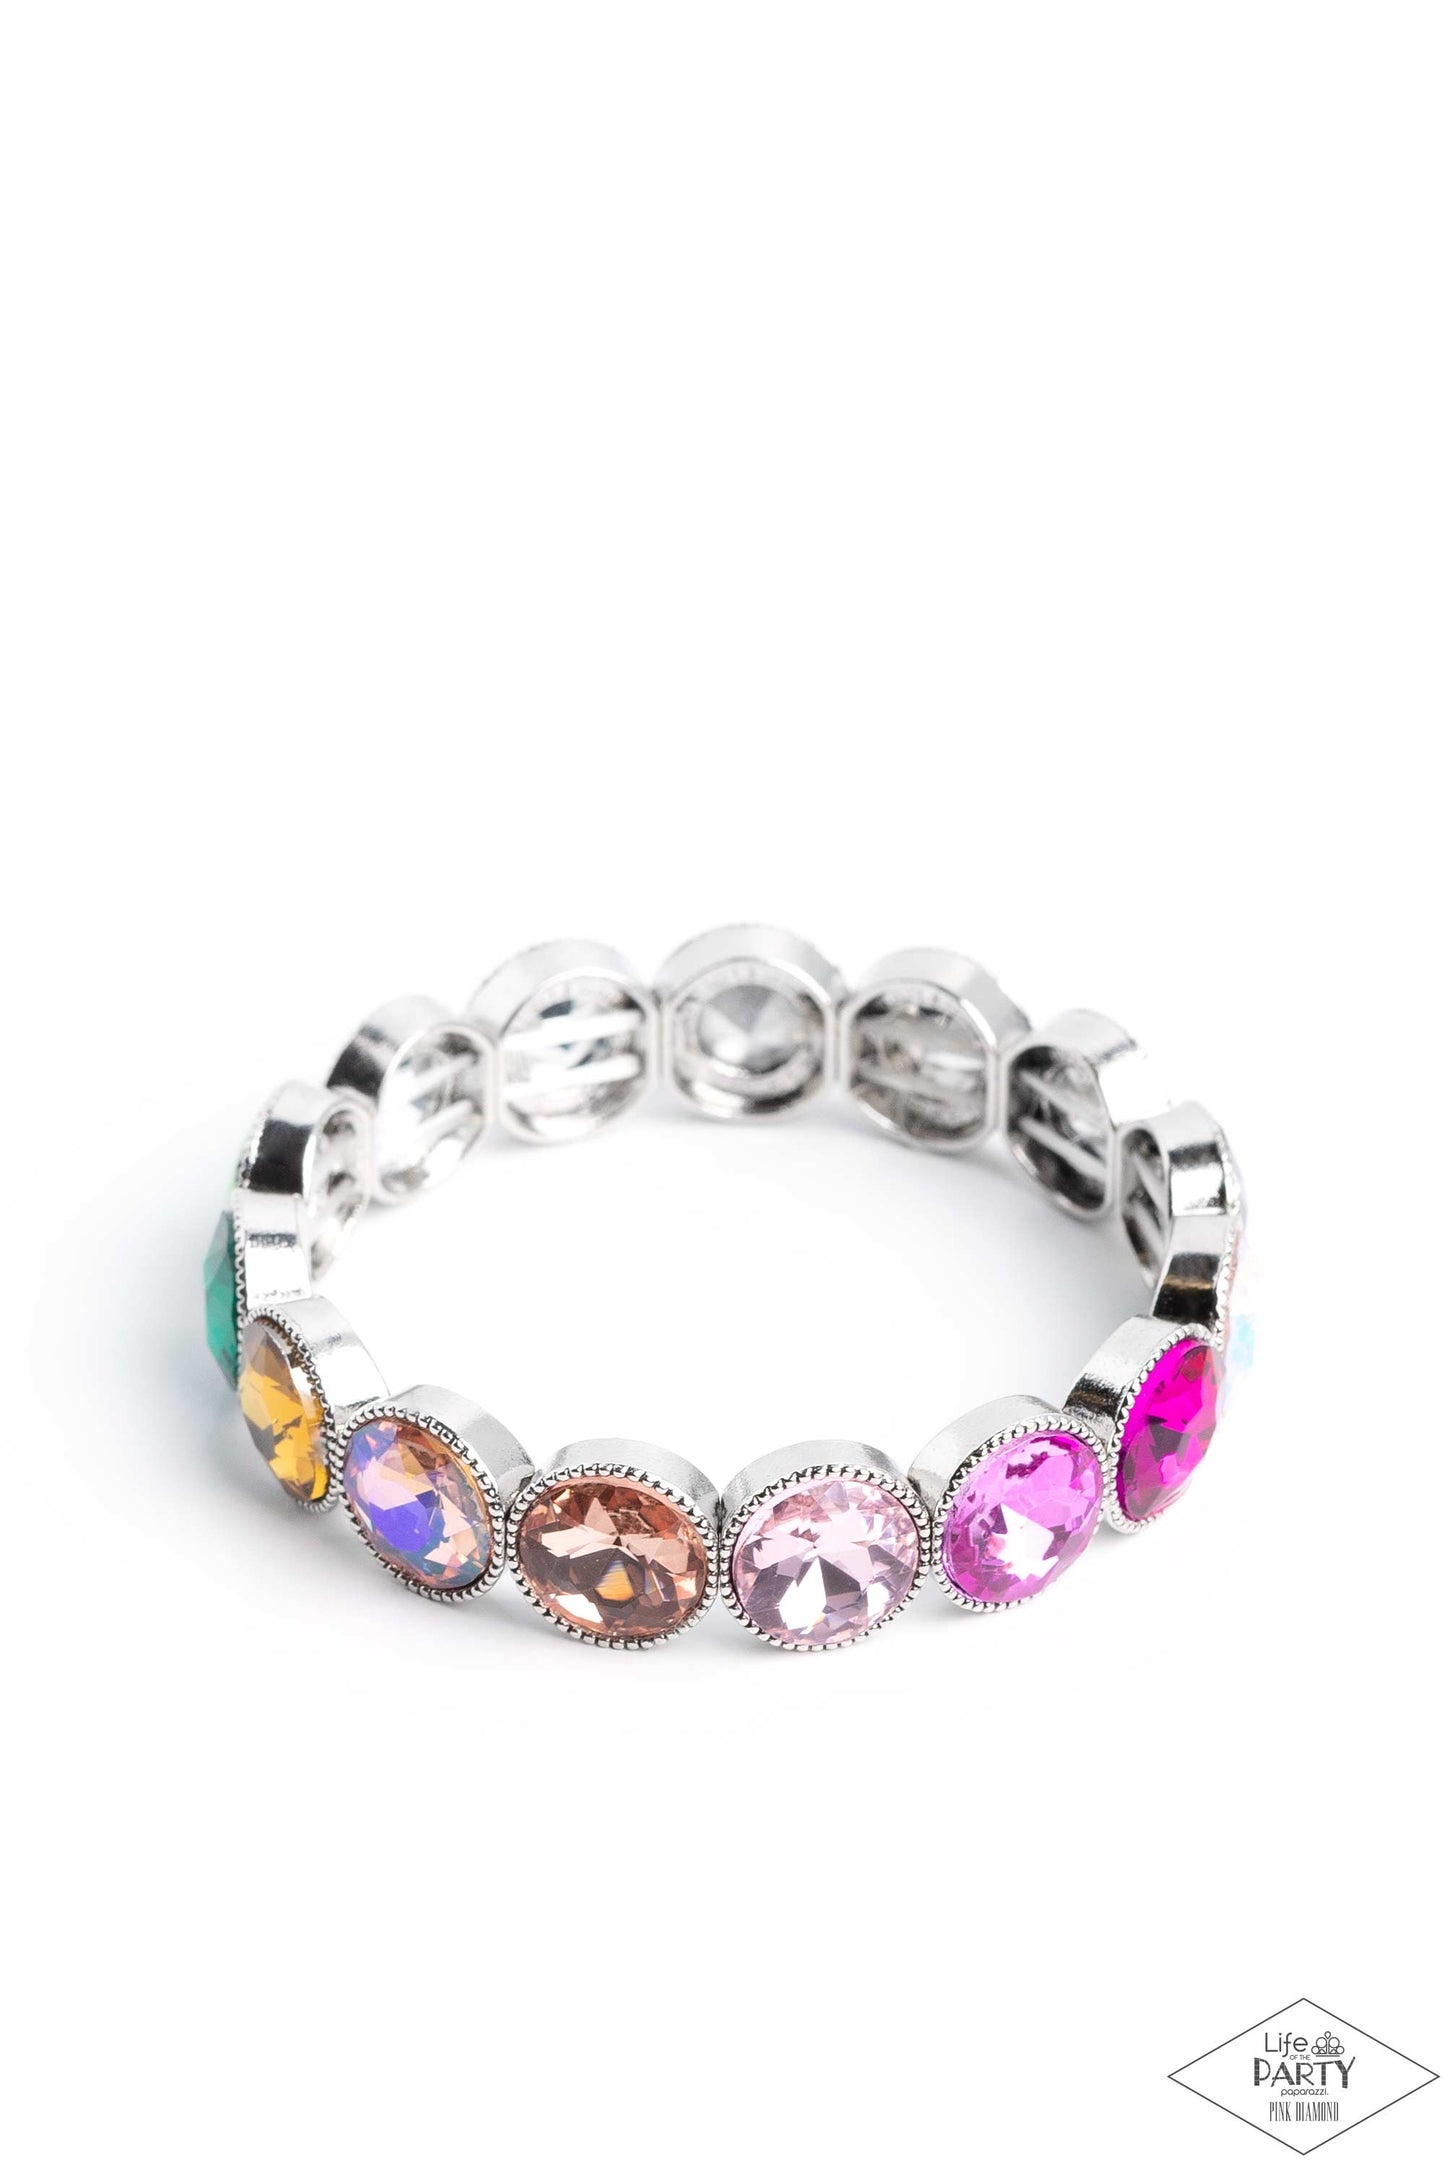 Number One Knockout Multi Stretch Bracelet - Paparazzi Accessories  Faceted gems in colorful shades featuring varying shimmers and iridescence are pressed into sleek silver frames. The glittery frames are threaded along elastic stretchy bands, creating a glamorous look around the wrist. Due to its prismatic palette, color may vary.  Sold as one individual bracelet.  P9RE-MTXX-139XX